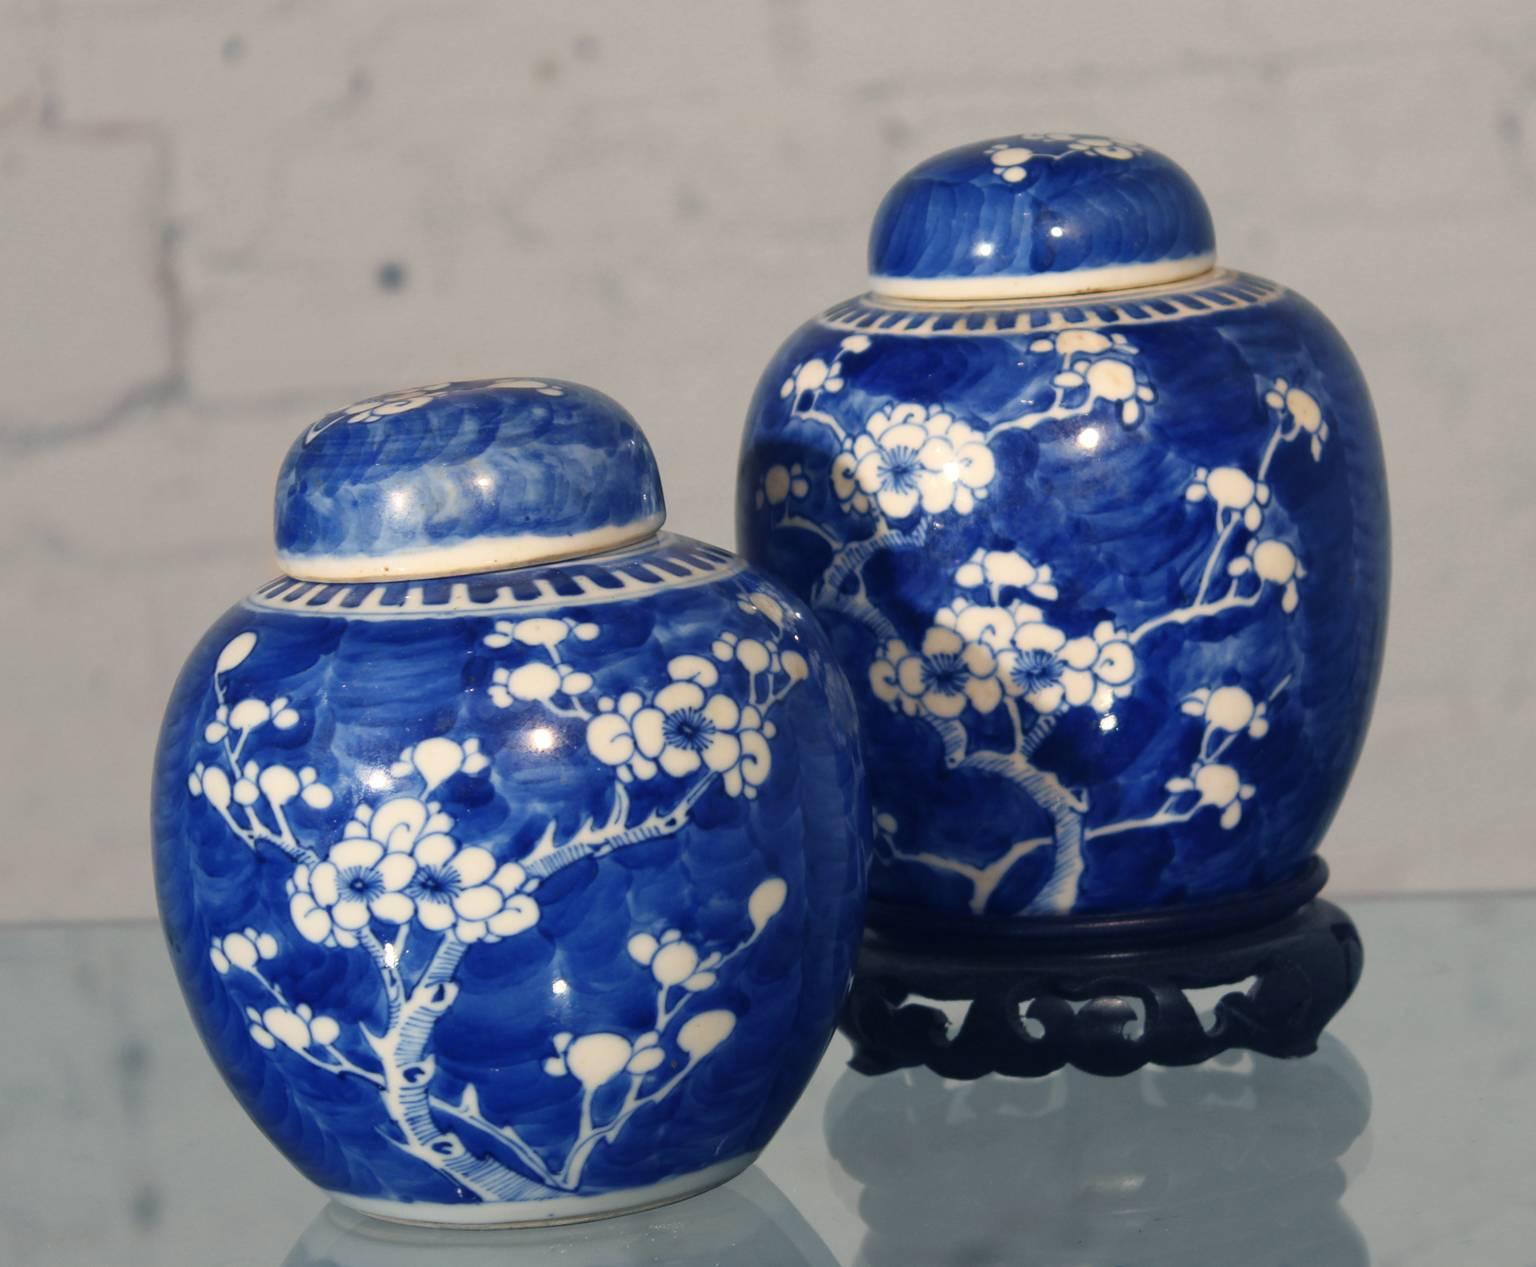 Handsome pair of Chinese porcelain ginger jars in wonderful to excellent condition with the double circle Kangxi mark. Most likely 19th century.

This is an outstanding pair of antique ginger jars with the double circle Kangxi mark and decorated